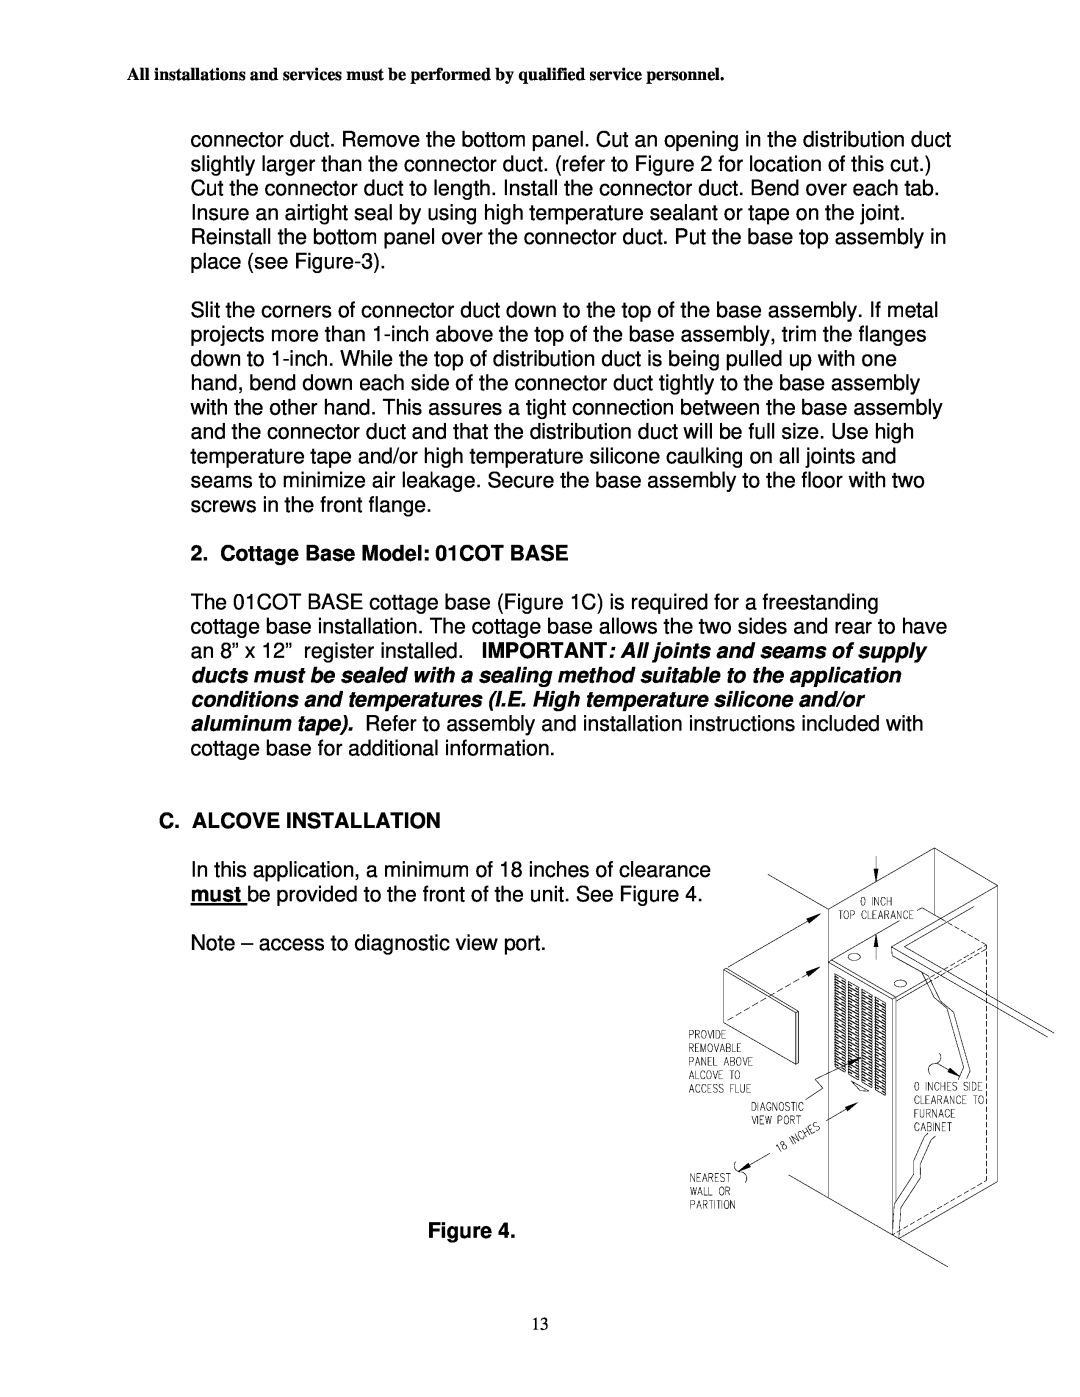 Thermo Products CMA1-50N, CMA2-75N service manual Cottage Base Model: 01COT BASE, C. Alcove Installation, Figure 